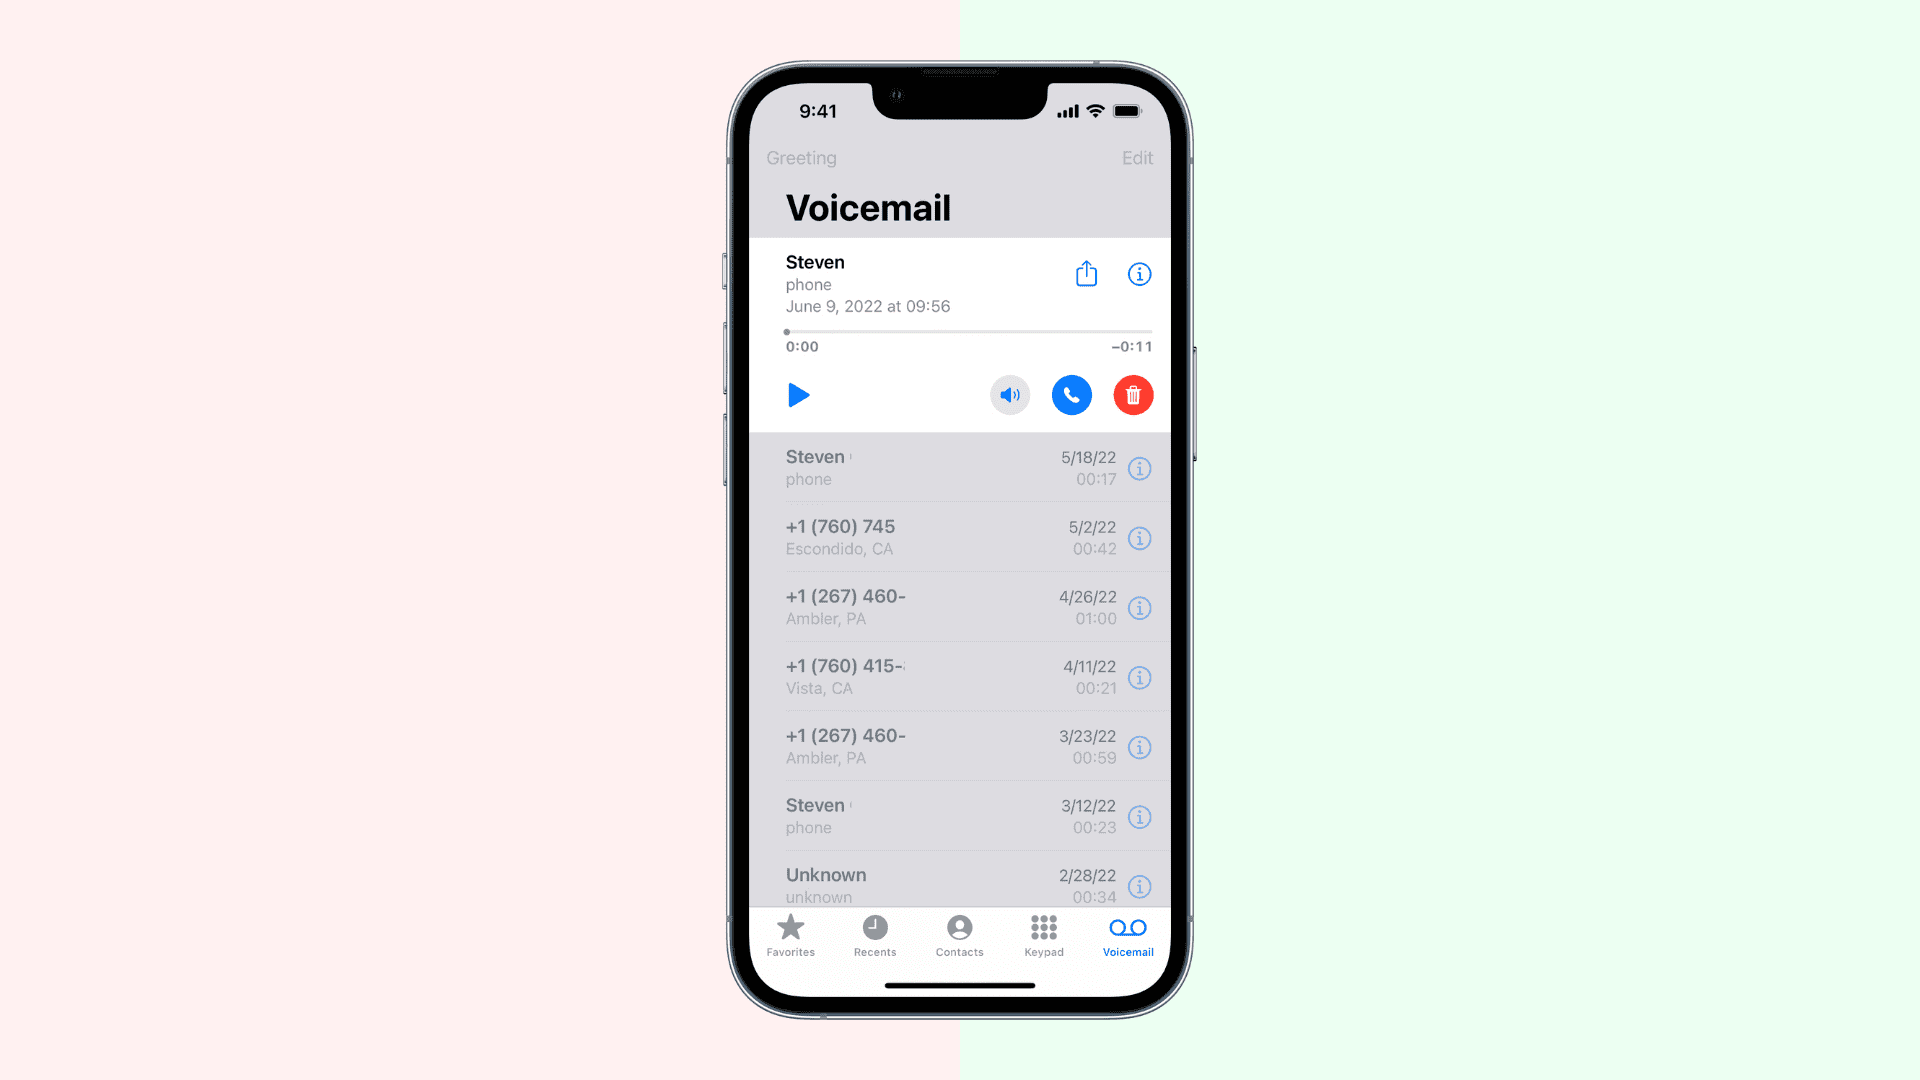 voicemail-speaker-activation-turning-on-on-iphone-10